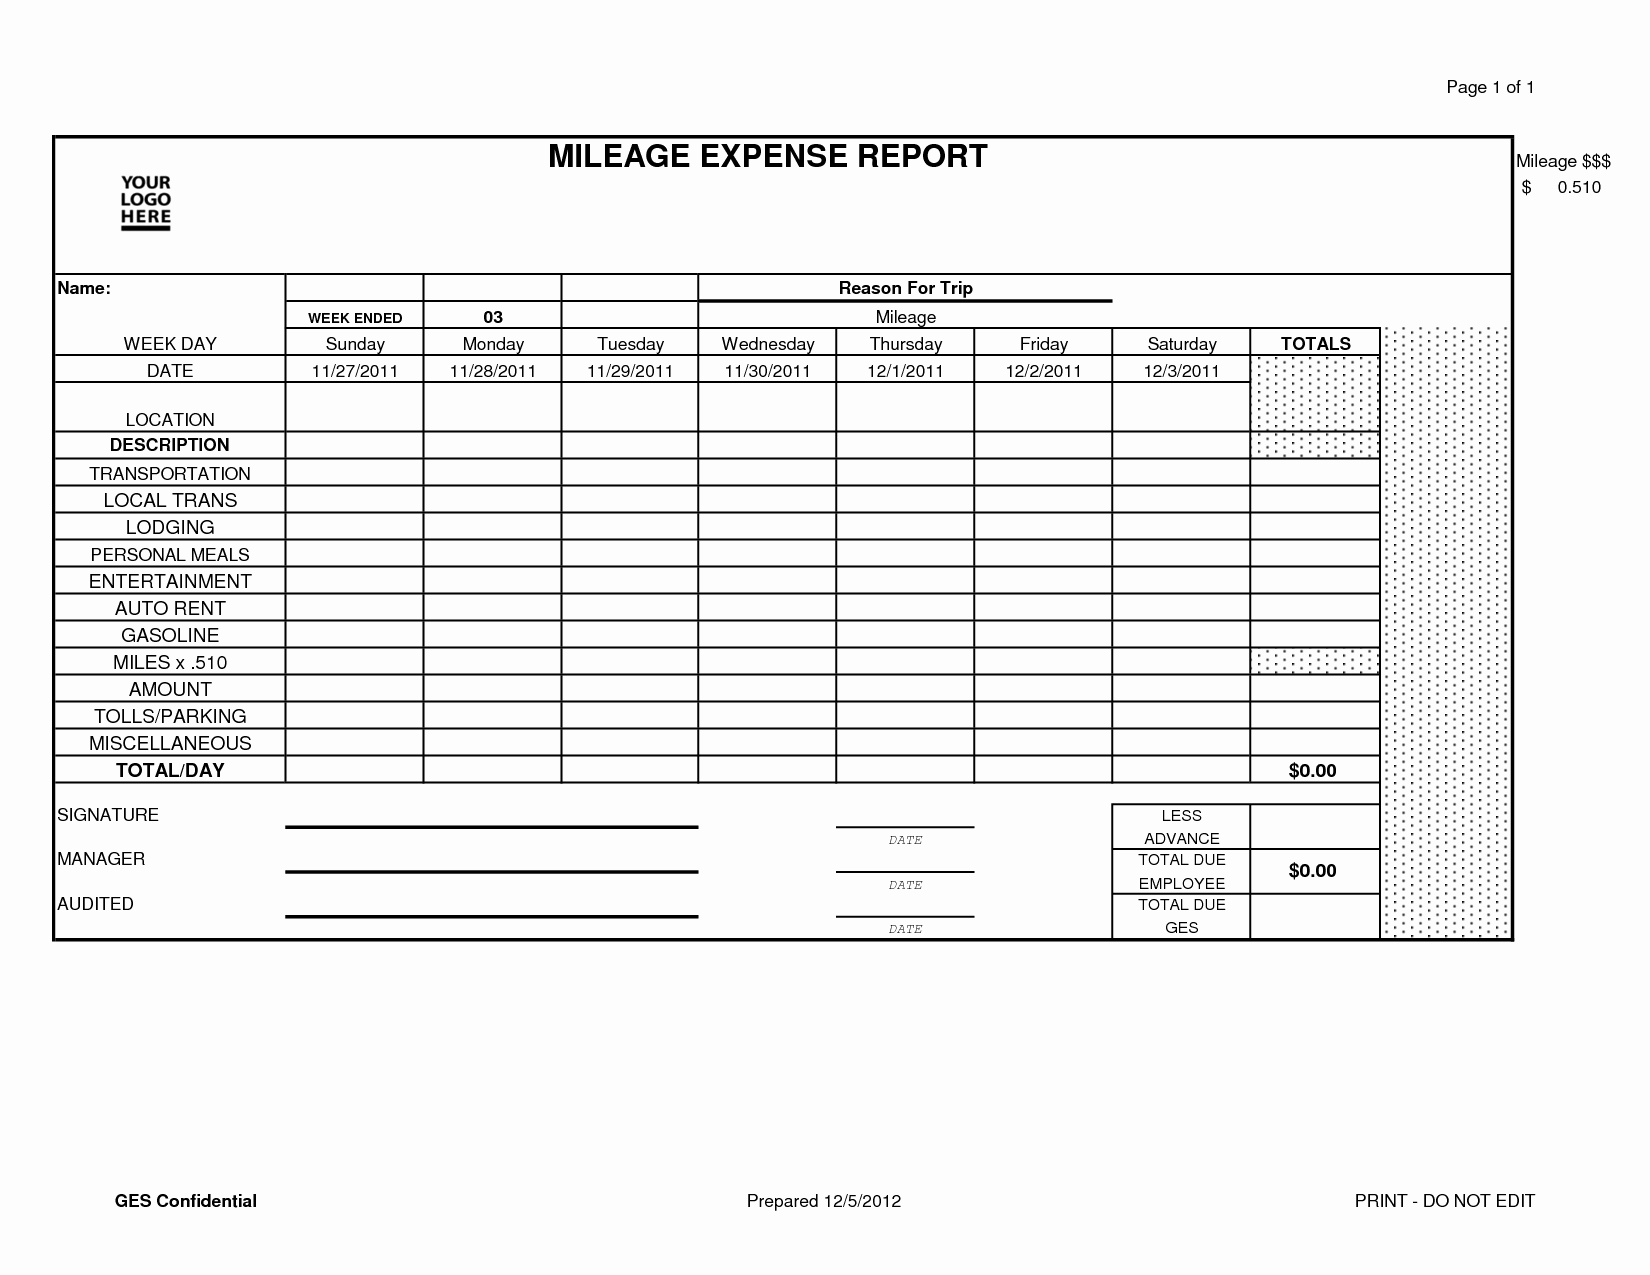 Simple Expense Report In Gas Mileage Expense Report Template